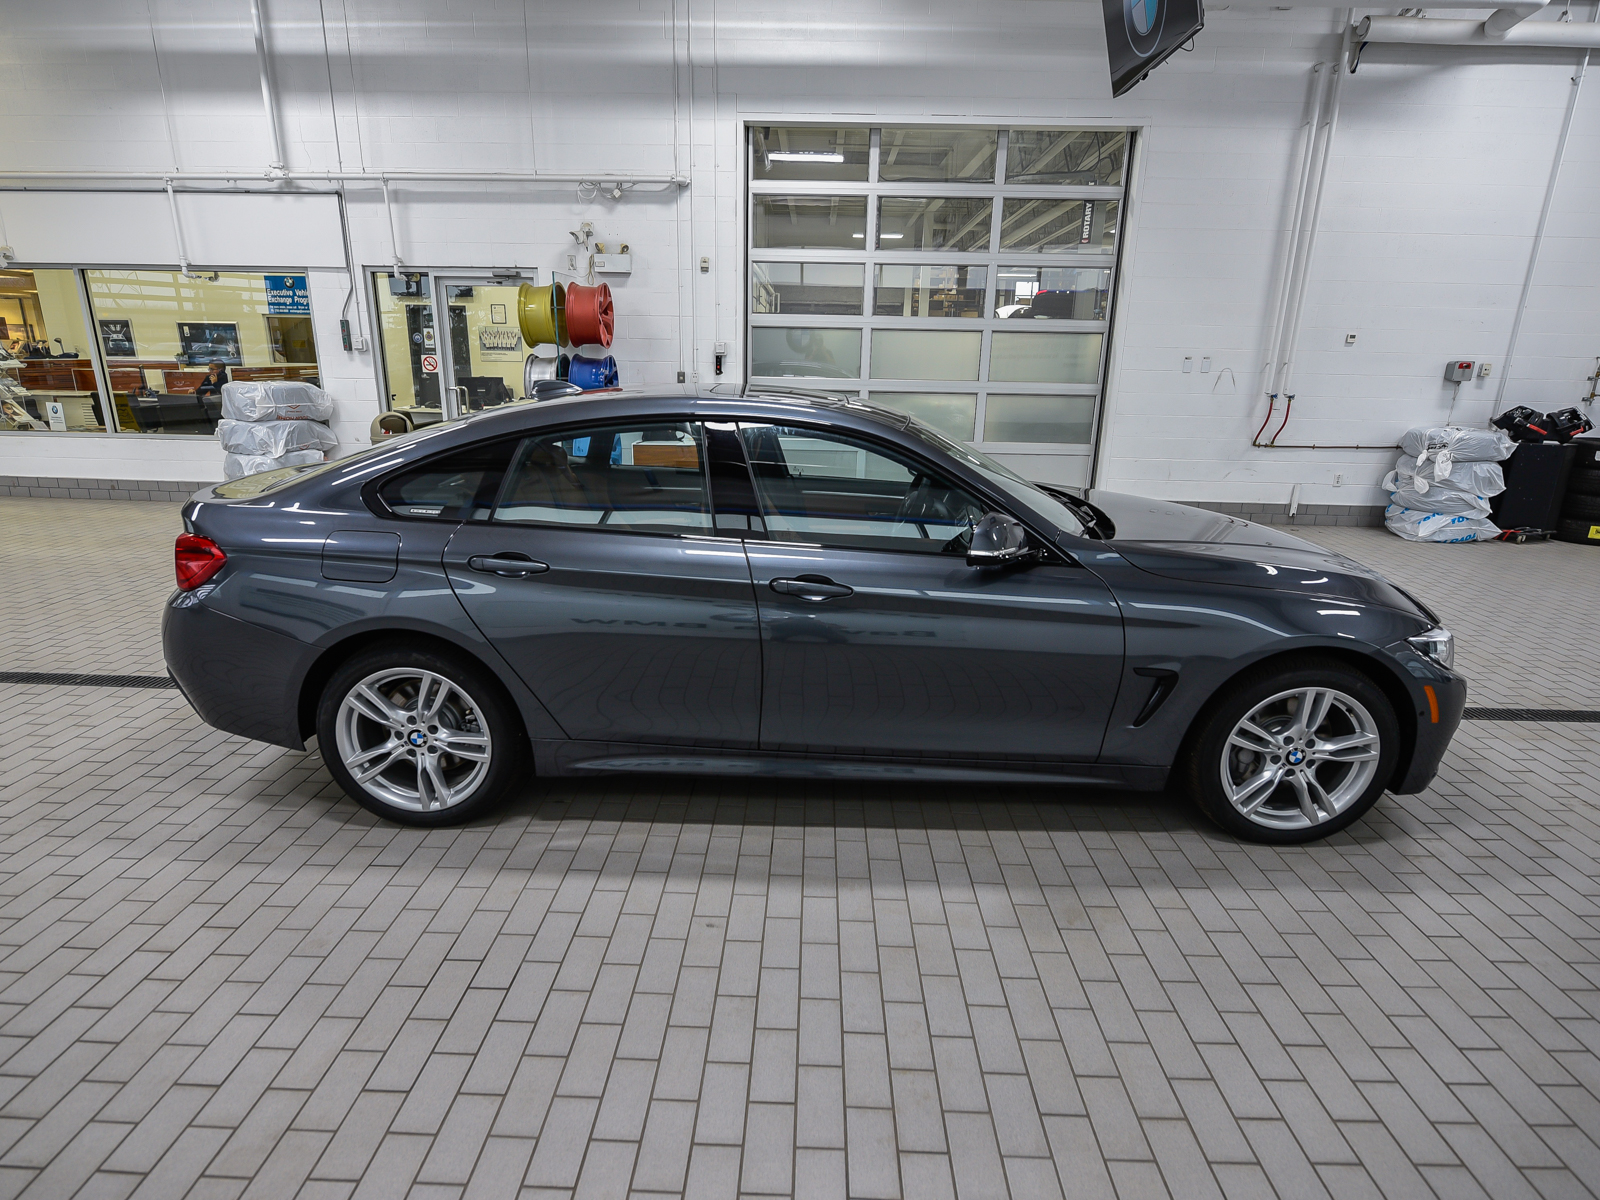 New 2019 BMW 430i xDrive Gran Coupe Coupe in Edmonton #194G7627